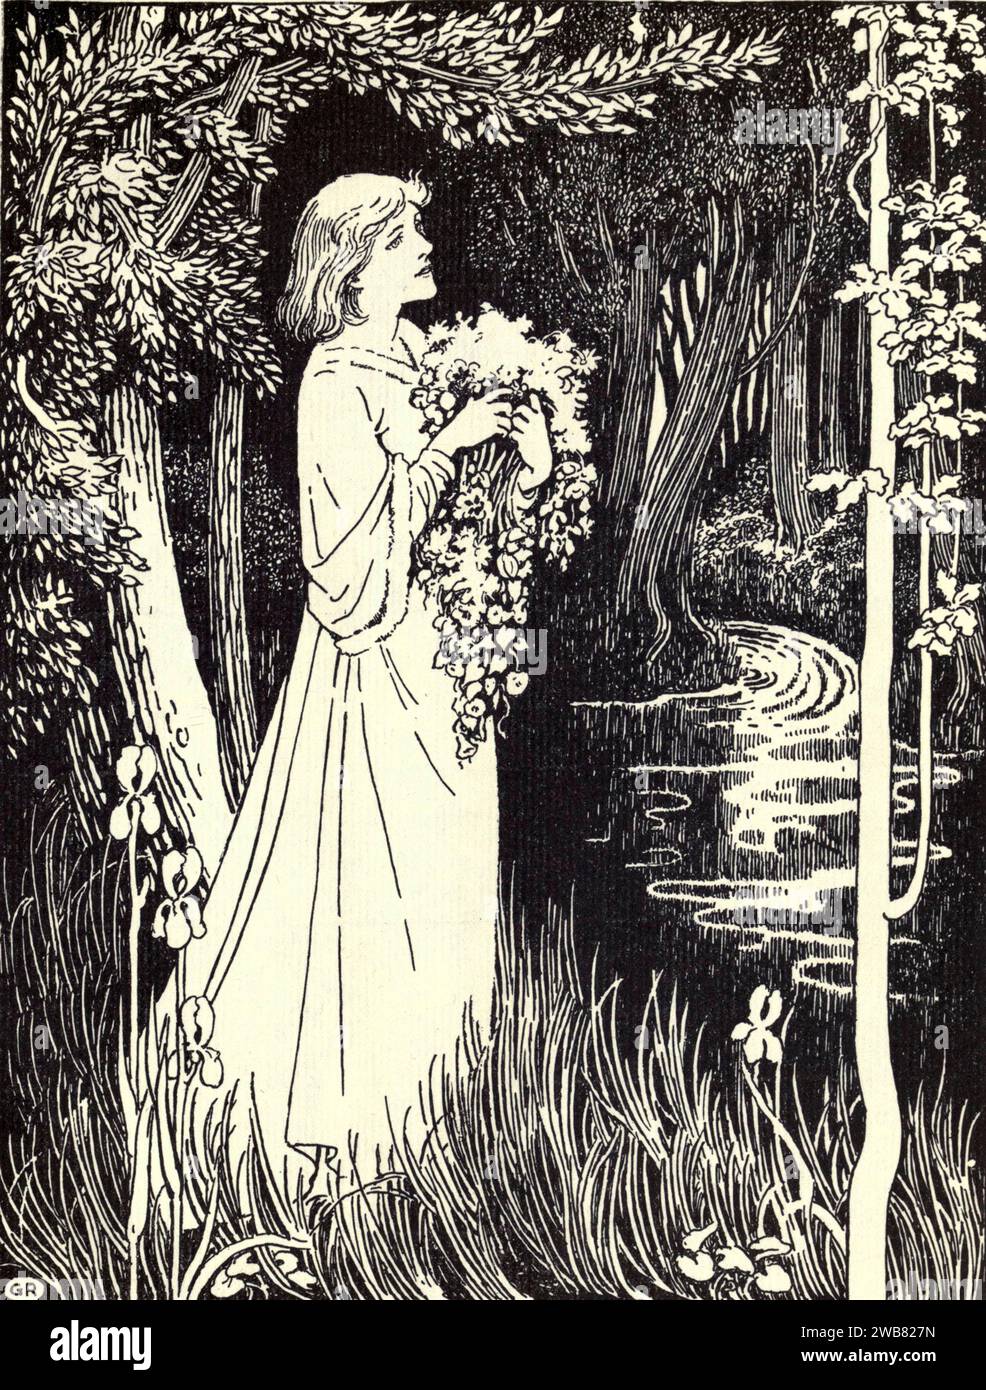 Miss Ellen Terry as Ophelia by W. GRAHAM ROBERTSON from A Tribute to the genius of William Shakespeare; being the programme of a performance at Drury Lane Theatre on May 2, 1916, the tercentenary of his death; humbly offered by the players and their fellow-workers in the kindred arts of music & painting MACMILLAN AND CO., LIMITED ST. MARTIN'S STREET, LONDON 1916 Stock Photo